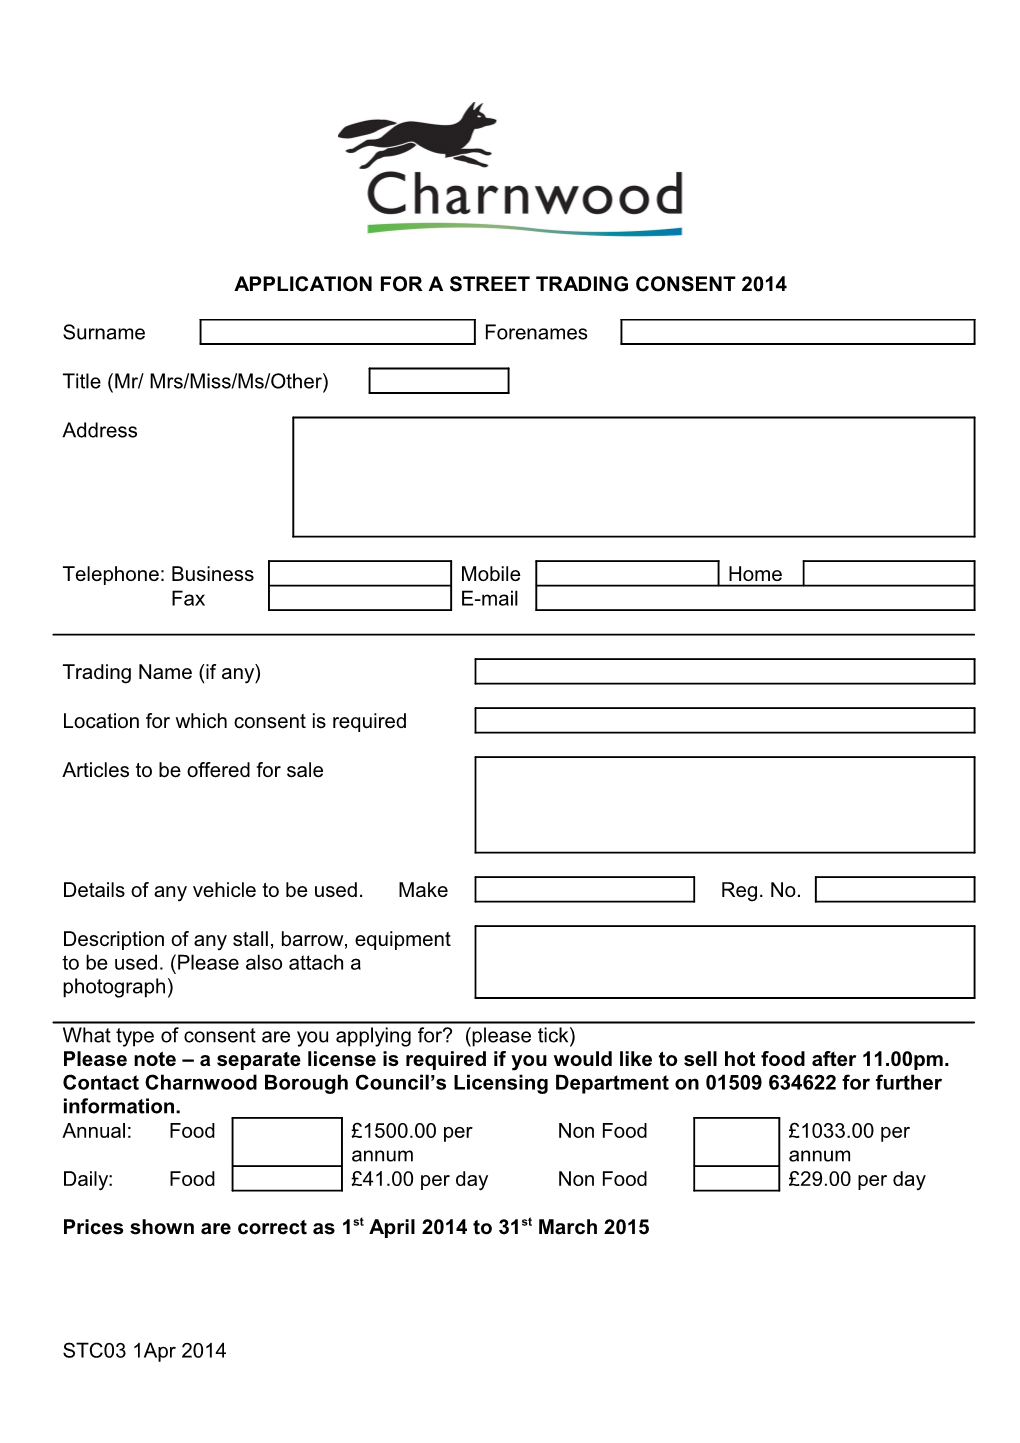 Application for a Street Trading Licence